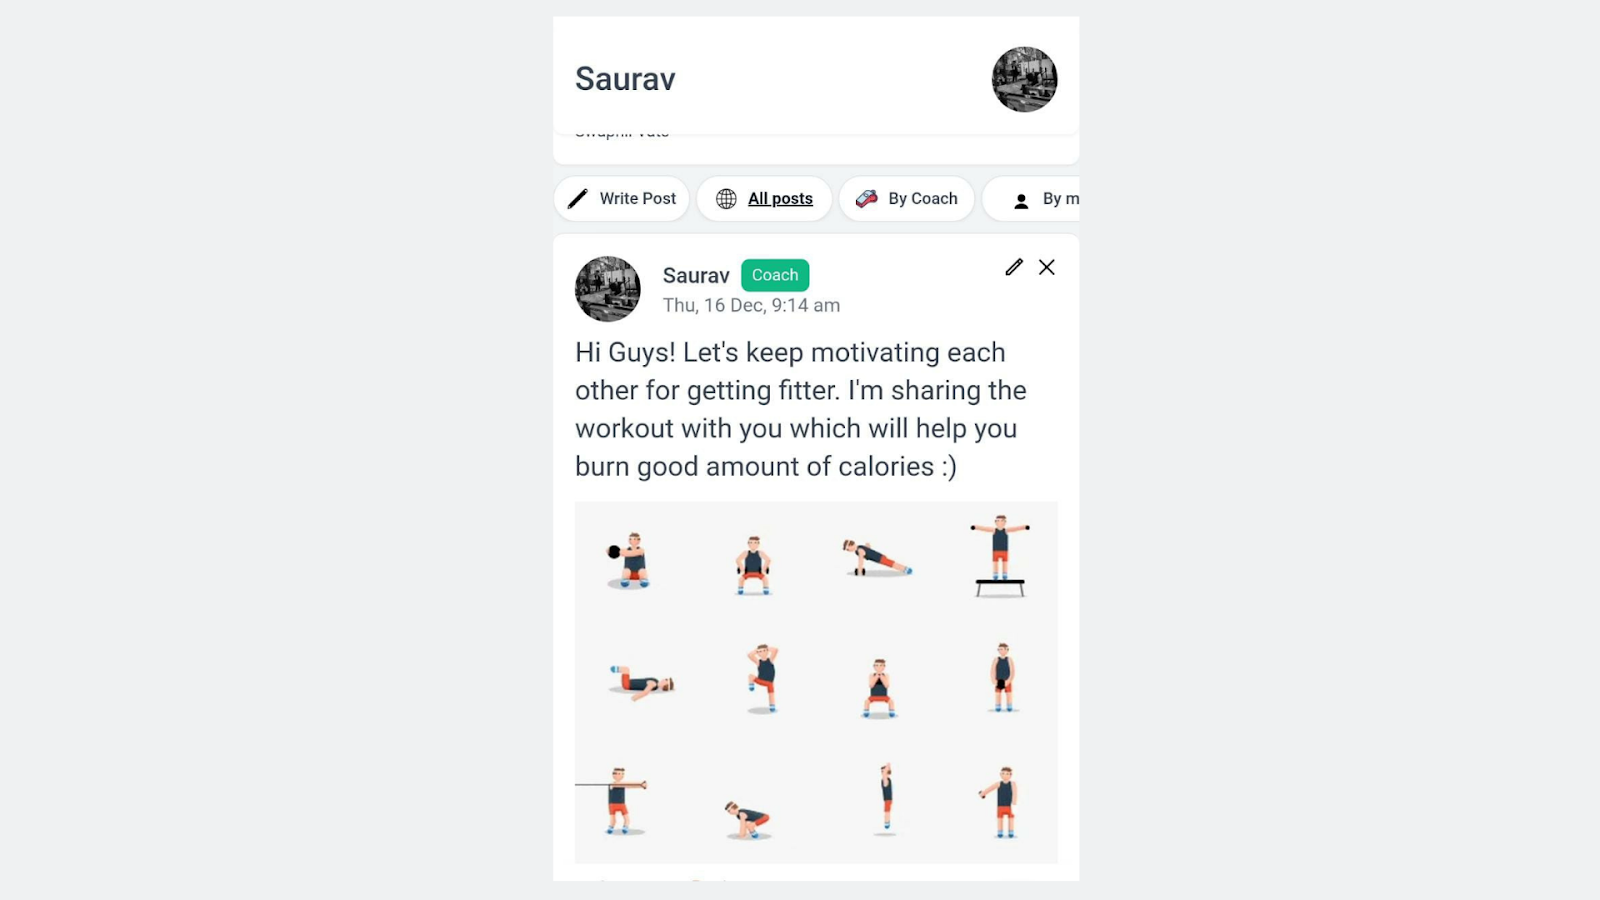 Share workout videos to keep your community motivated.